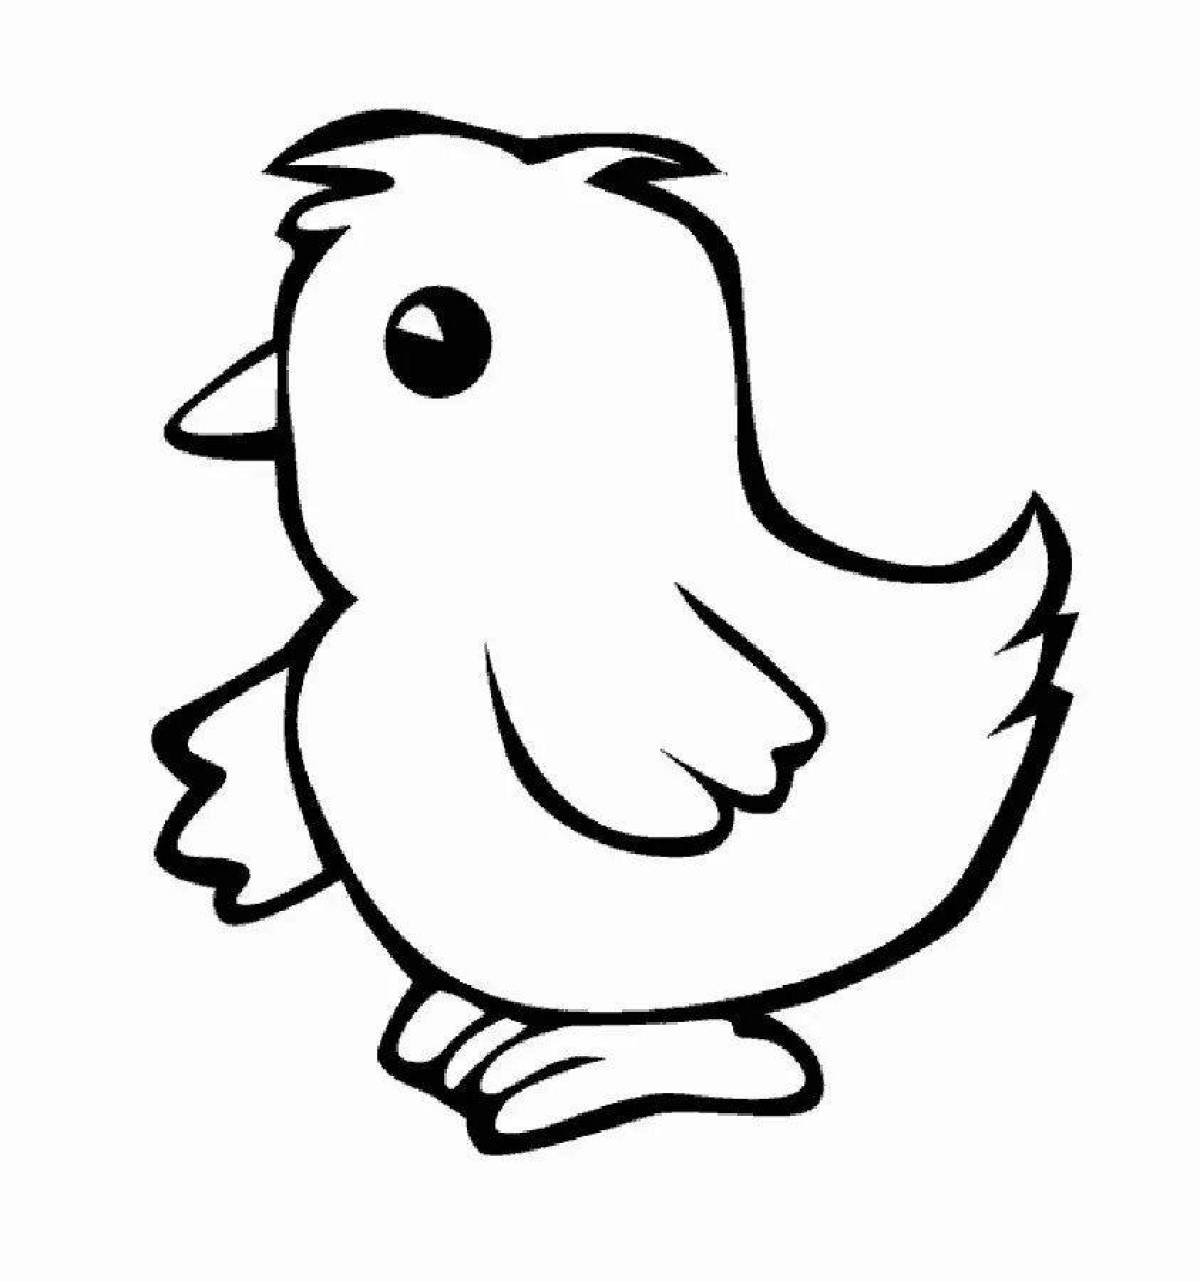 Coloring page happy chick for kids